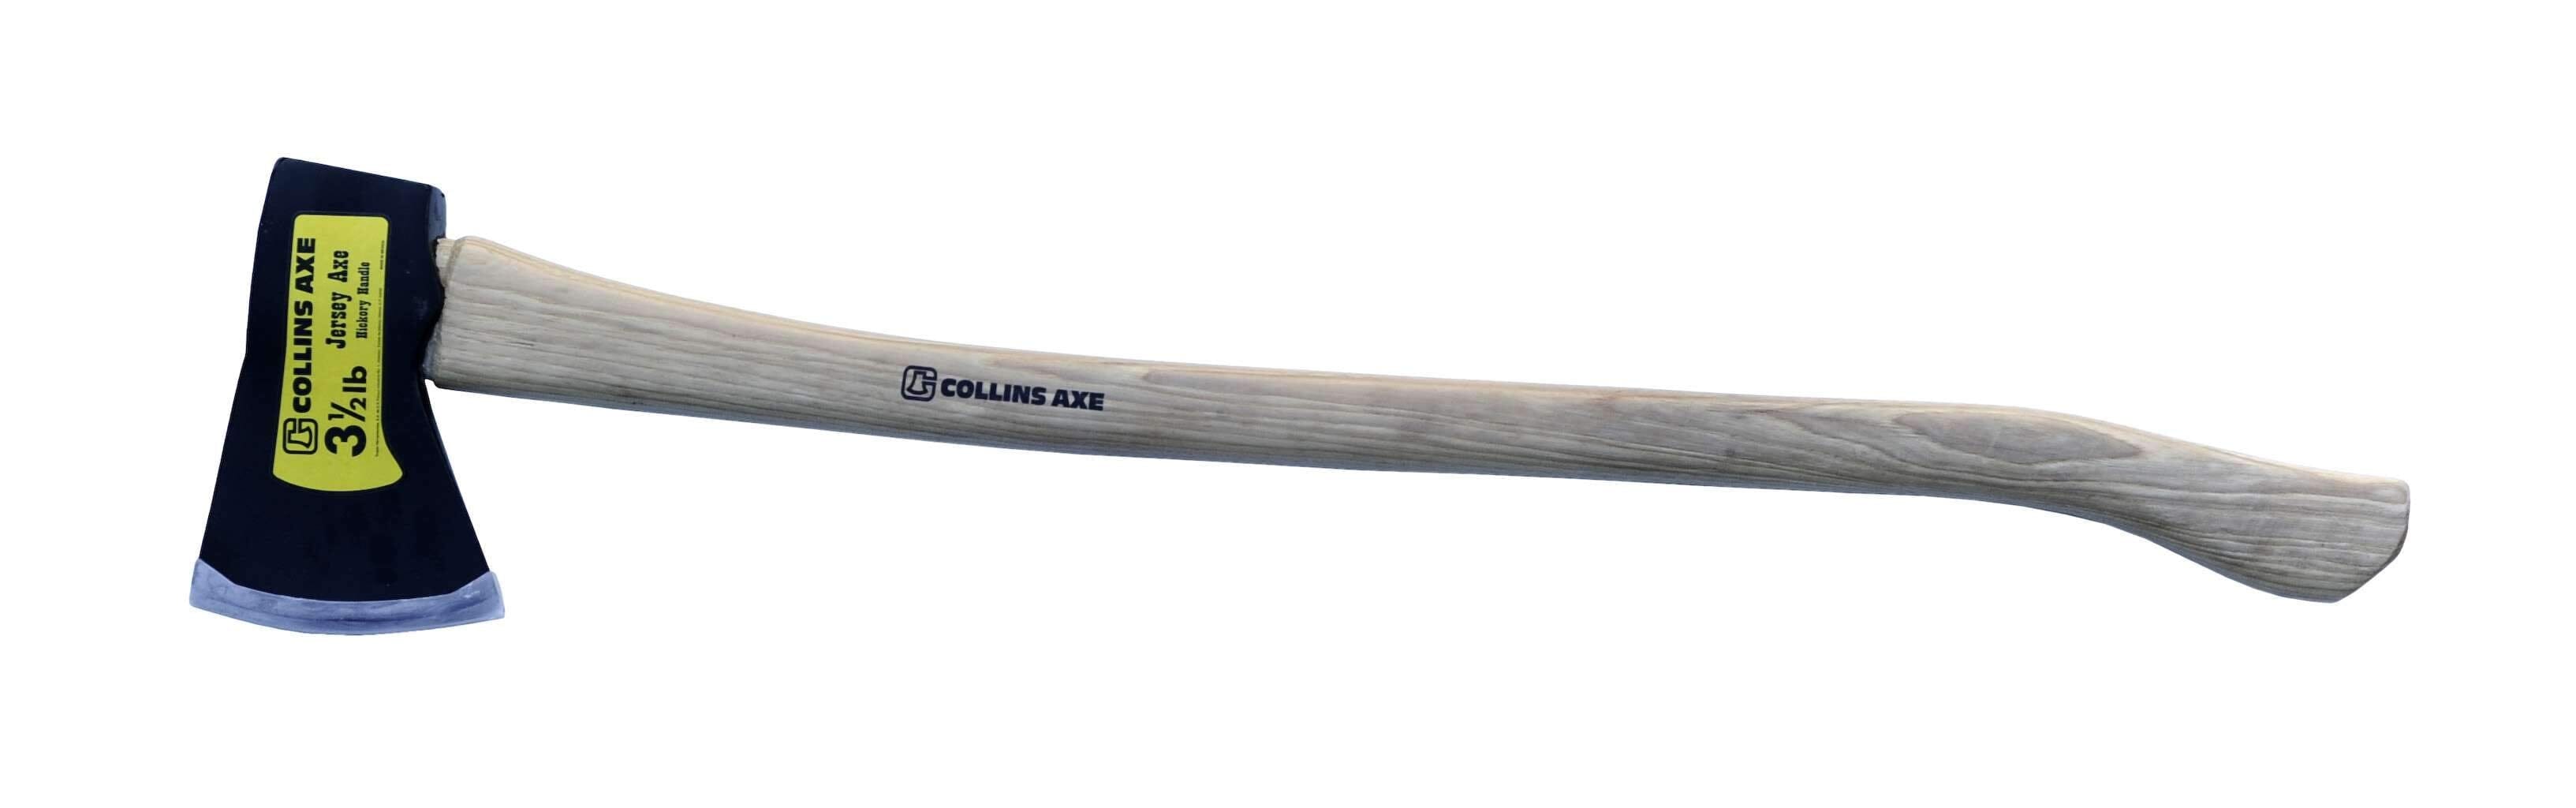 Truper Axe - Commander Jersey Ptn with 32" Hickory Handle